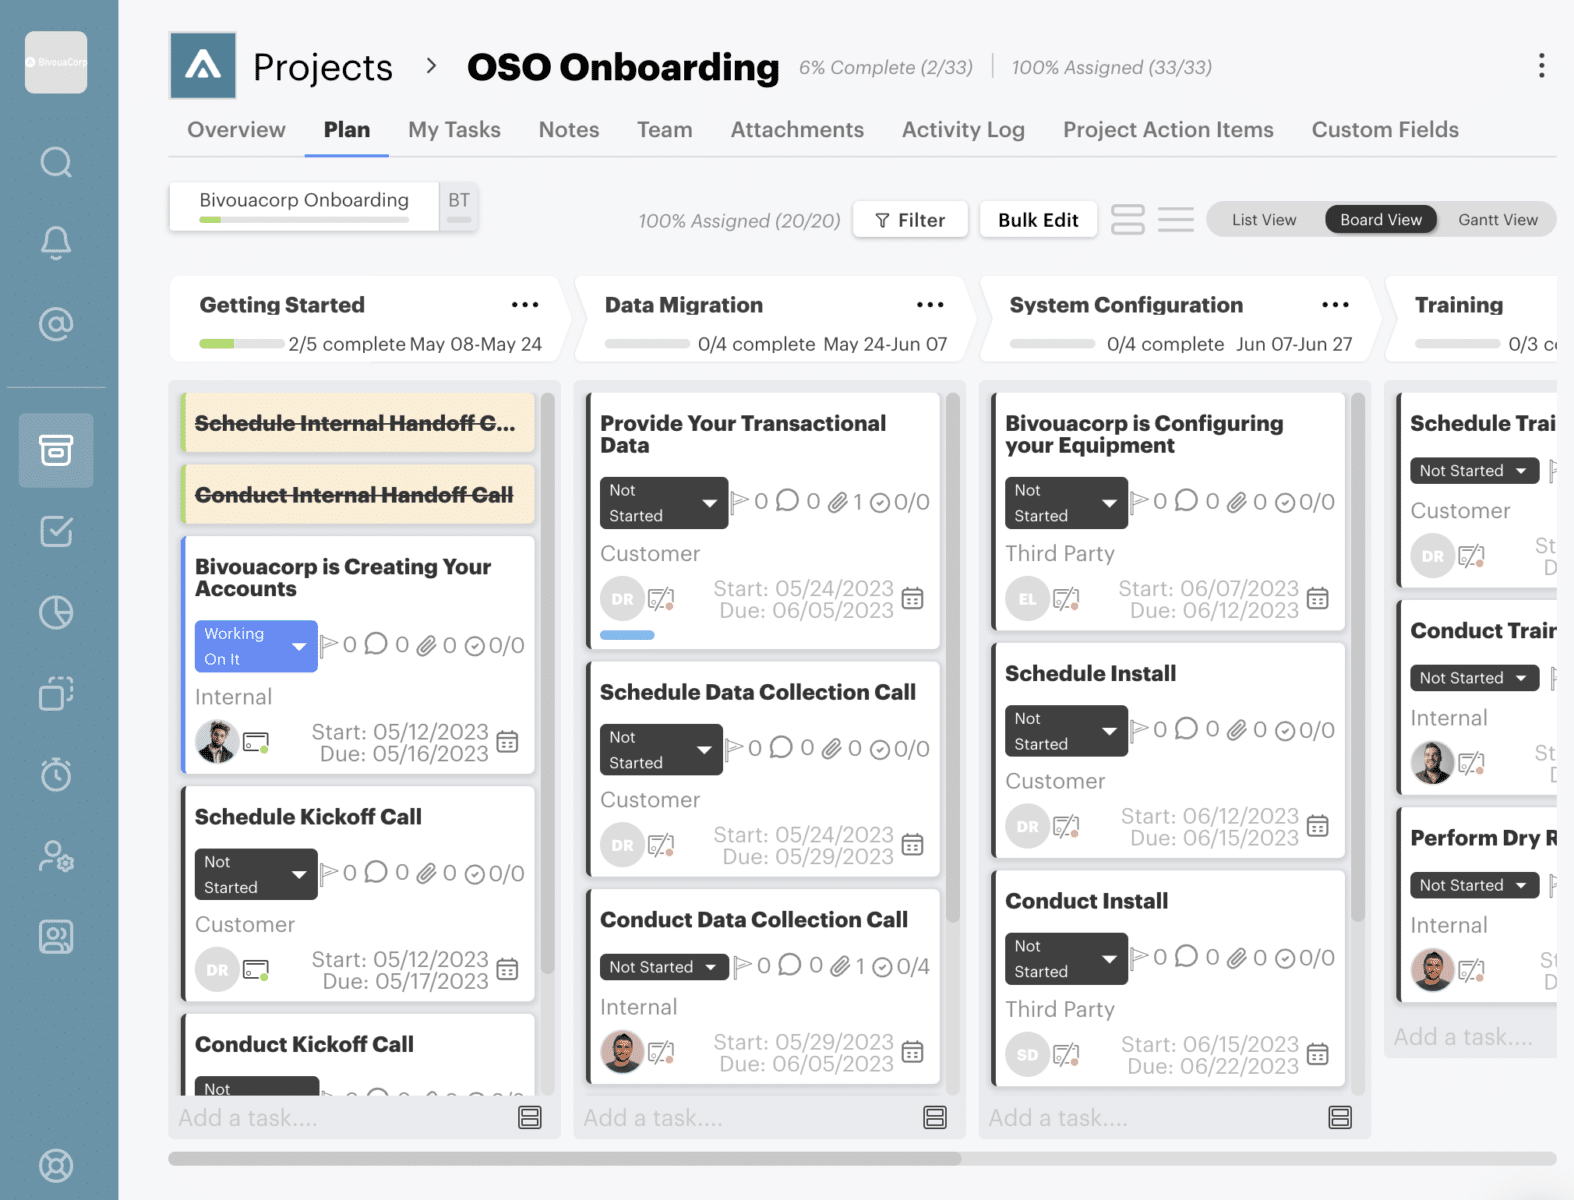 project board view in GUIDEcx customer onboarding platform for project managers and team members